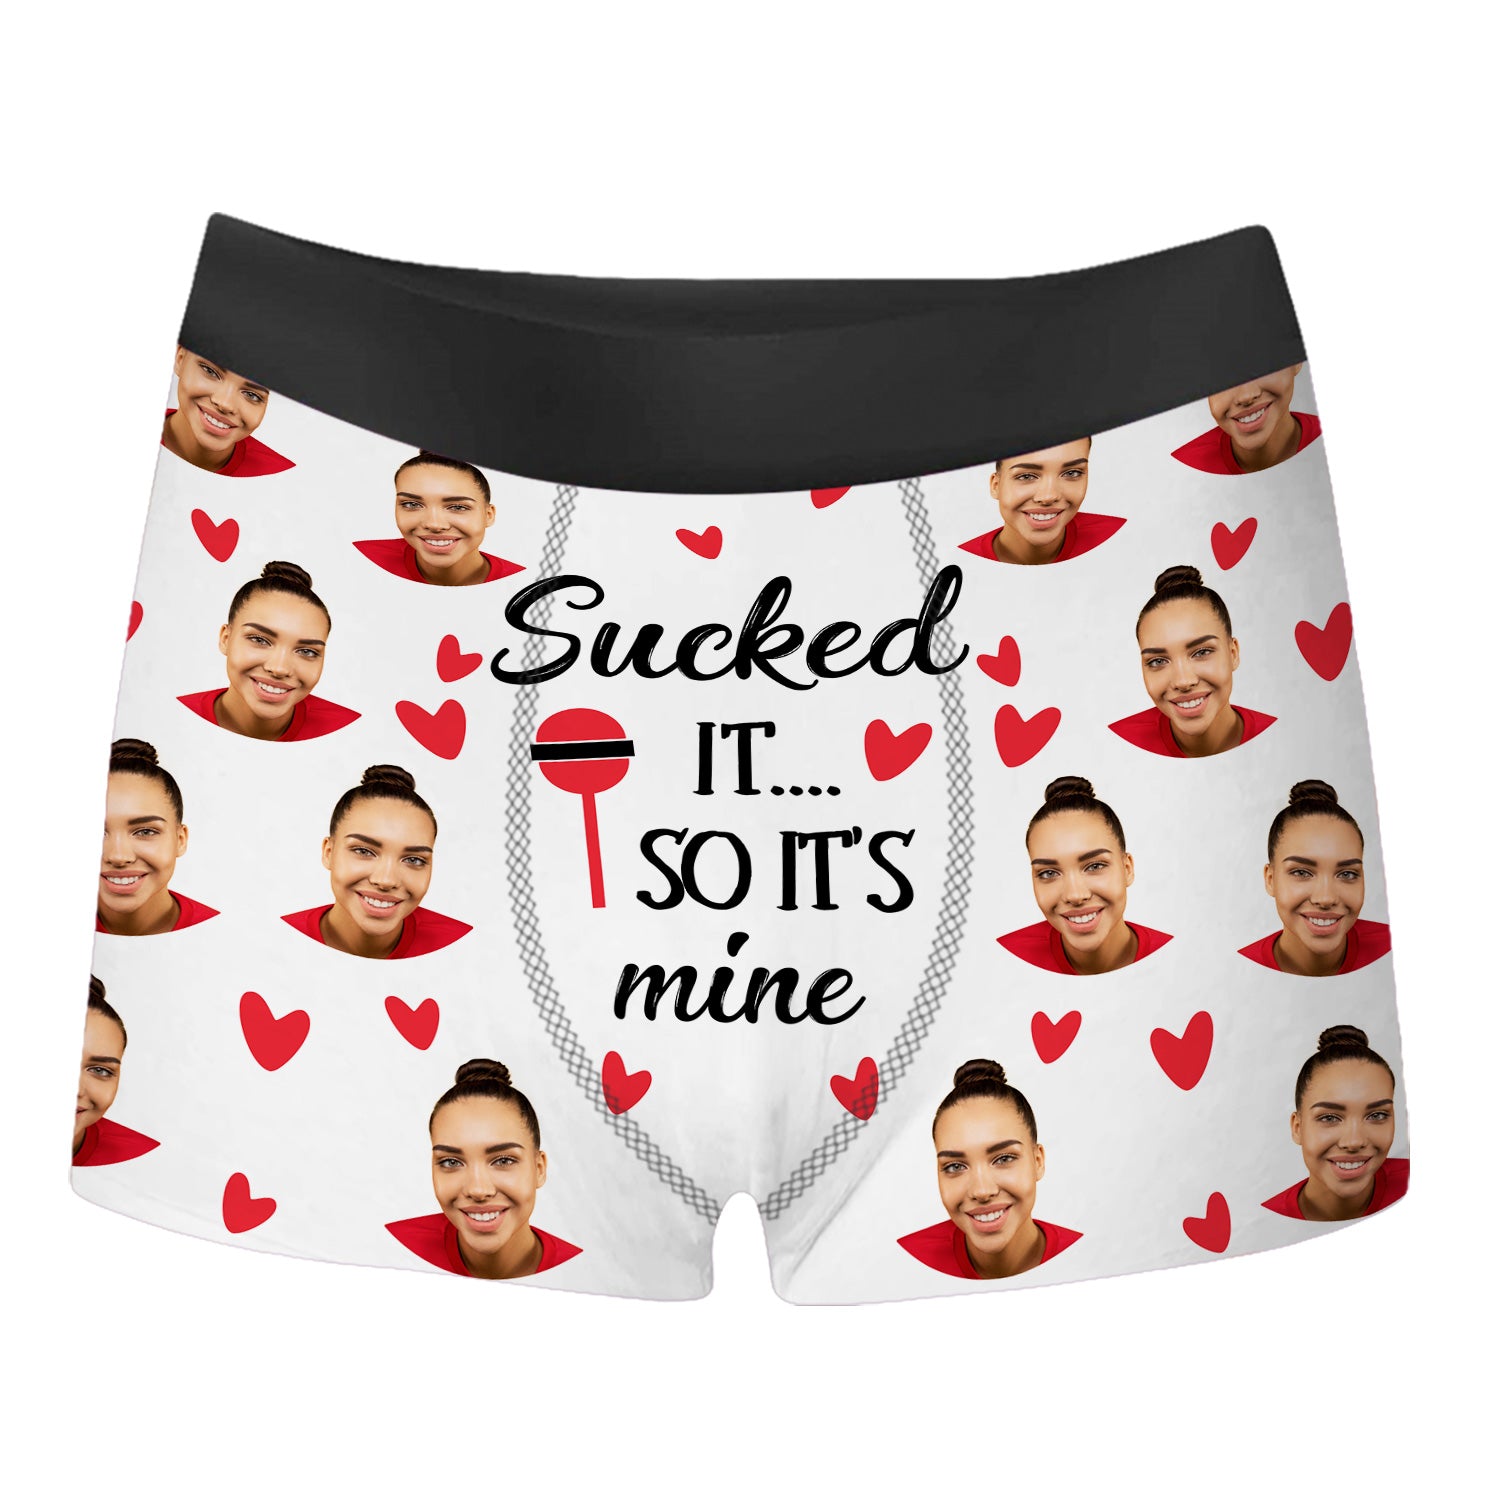 Custom Boxers for Men with Face - Personalized Underwear with Photo for  Couple Customized Underwear with Star XS-5XL